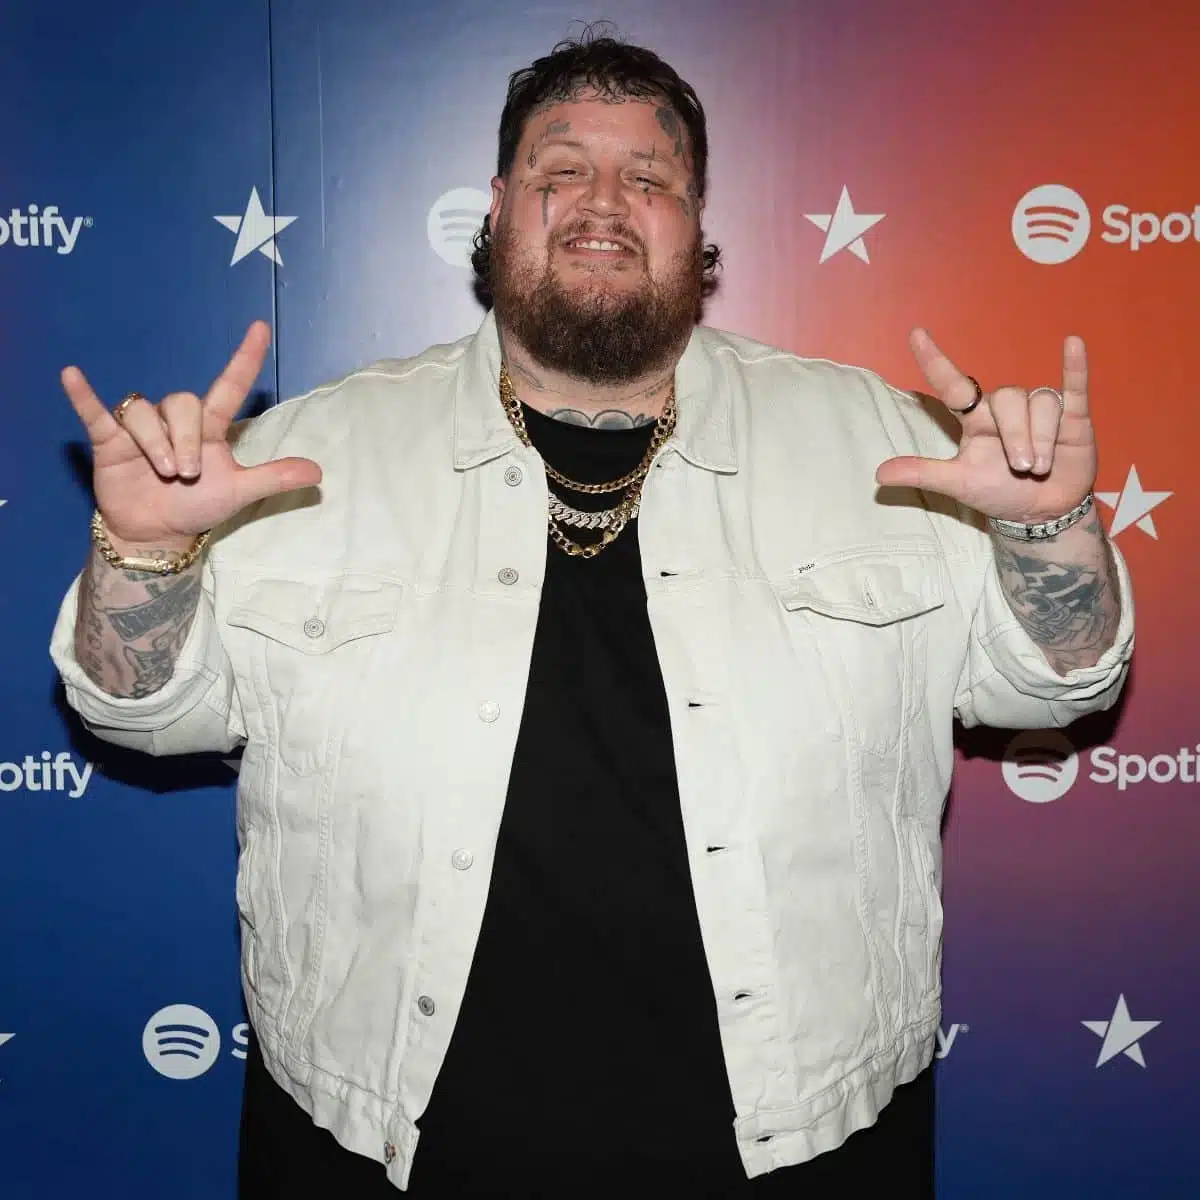 How tall is Jelly Roll? - Famous People Today